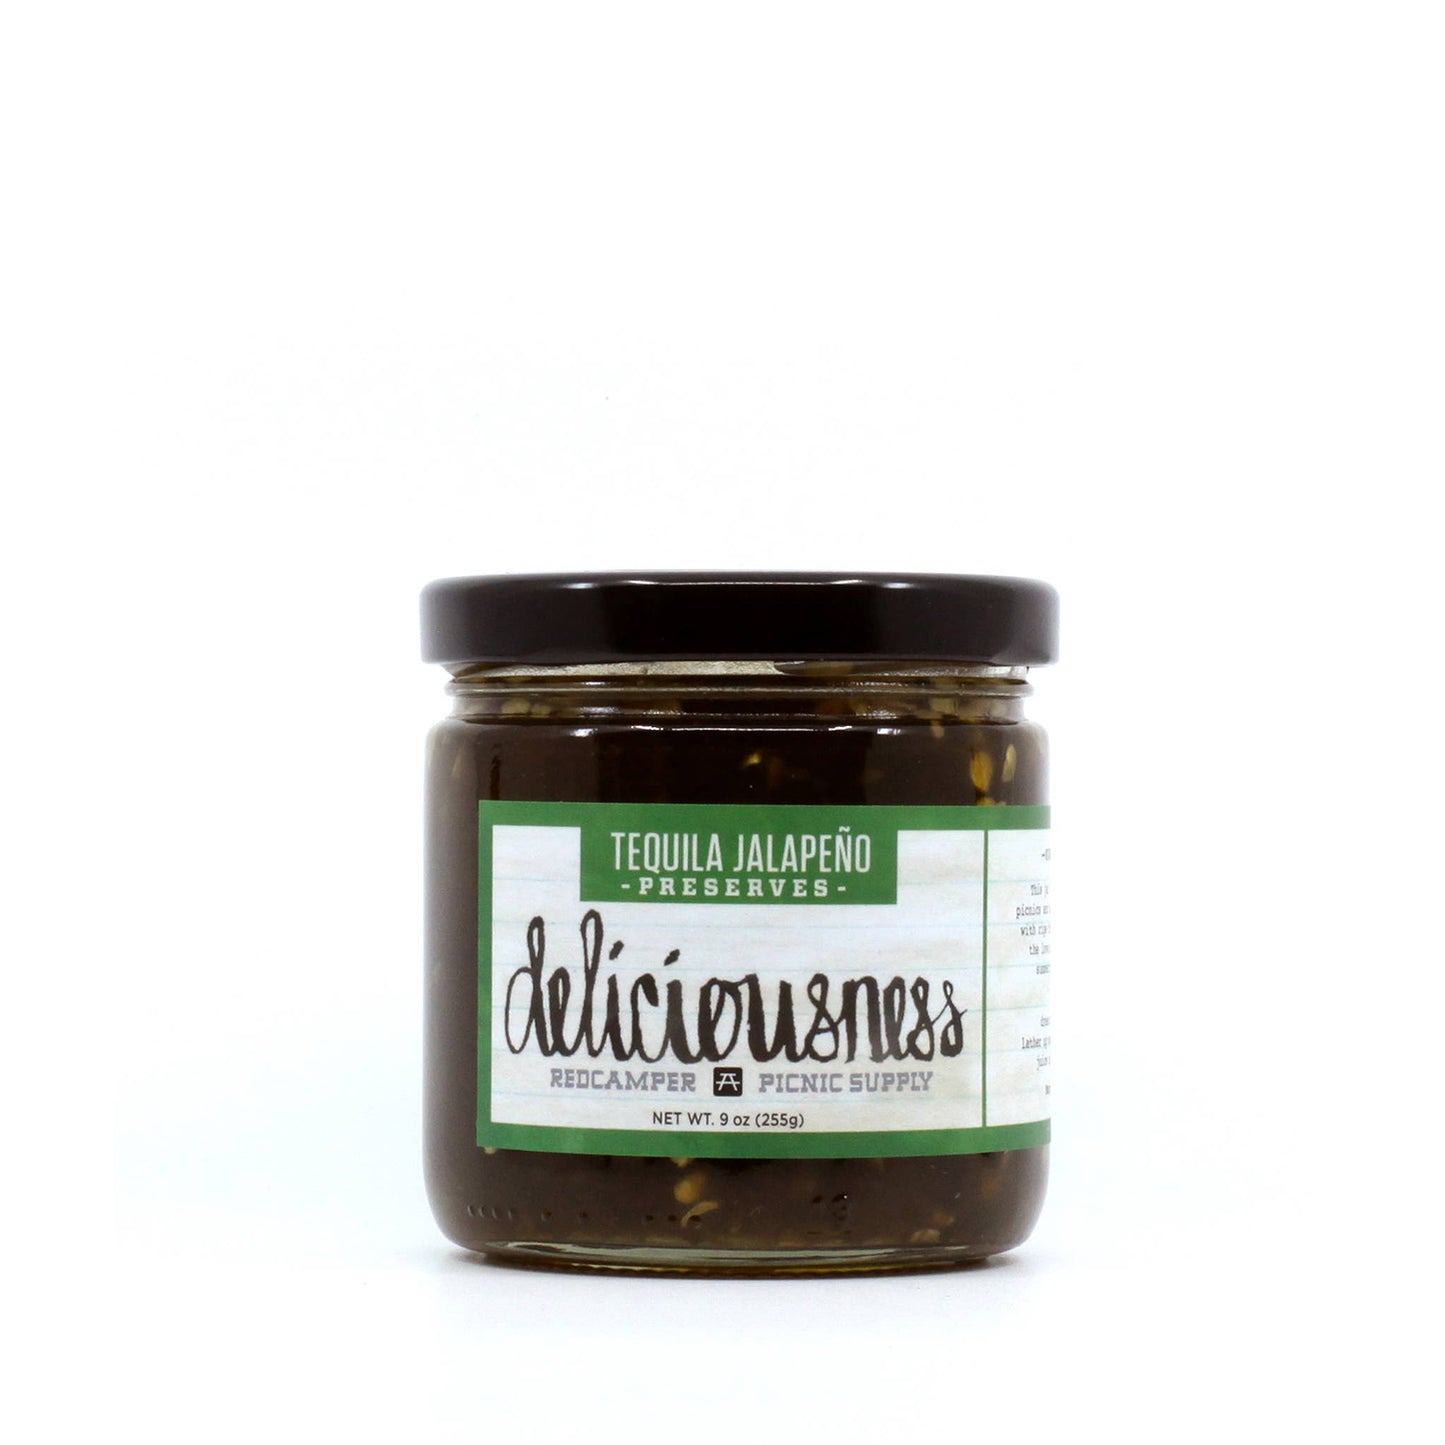 Tequila Jalapeño Deliciousness Preserves - 9oz (Cheeseboard)